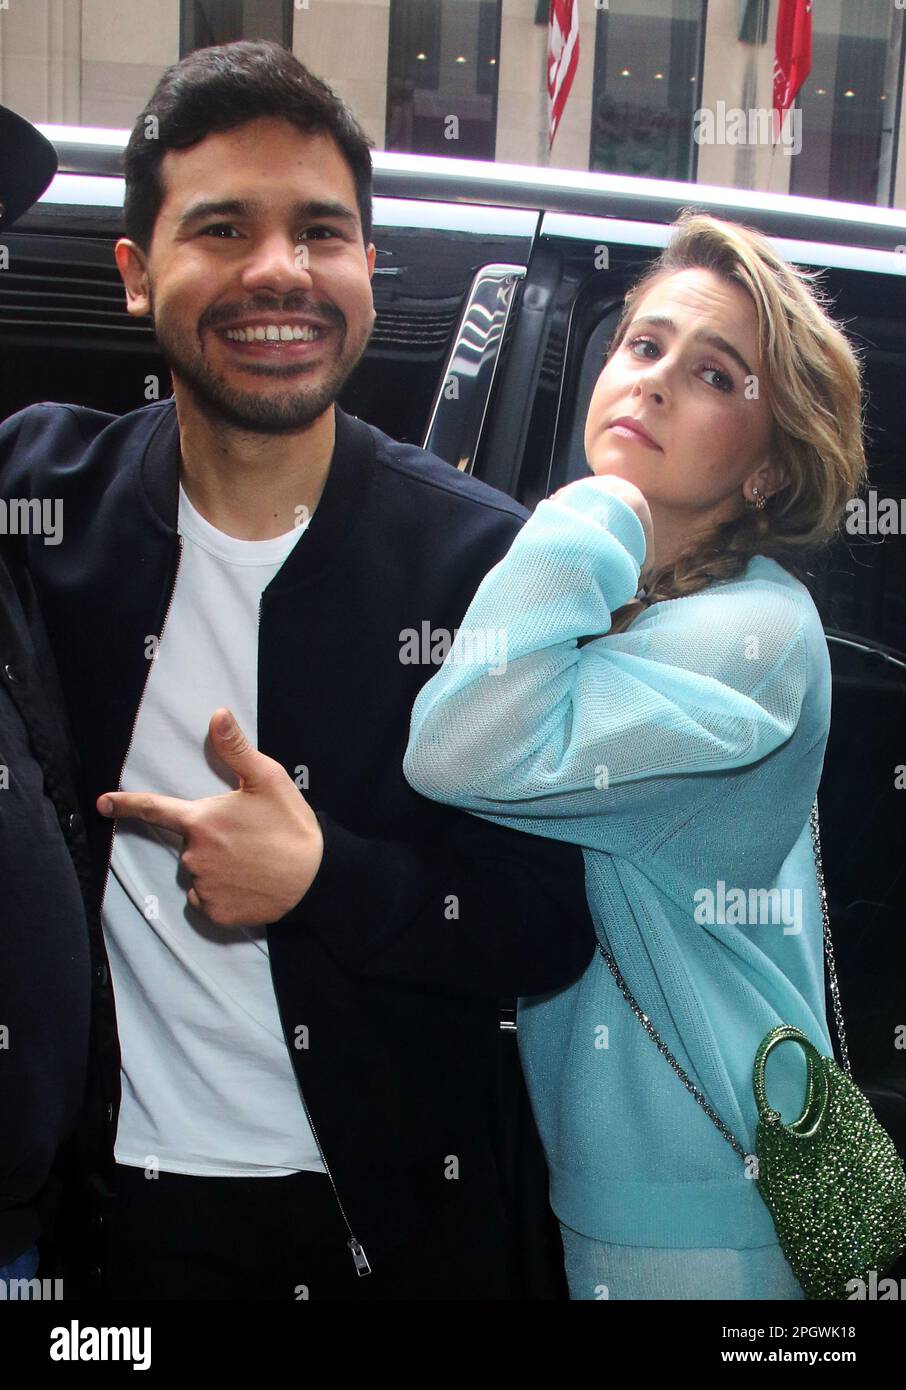 New York, NY, USA. 24th Mar, 2023. Carlos Valdes and Mae Whitman seen at New York Live promoting Up Here on March 24, 2023 in New York City. Credit: Rw/Media Punch/Alamy Live News Stock Photo